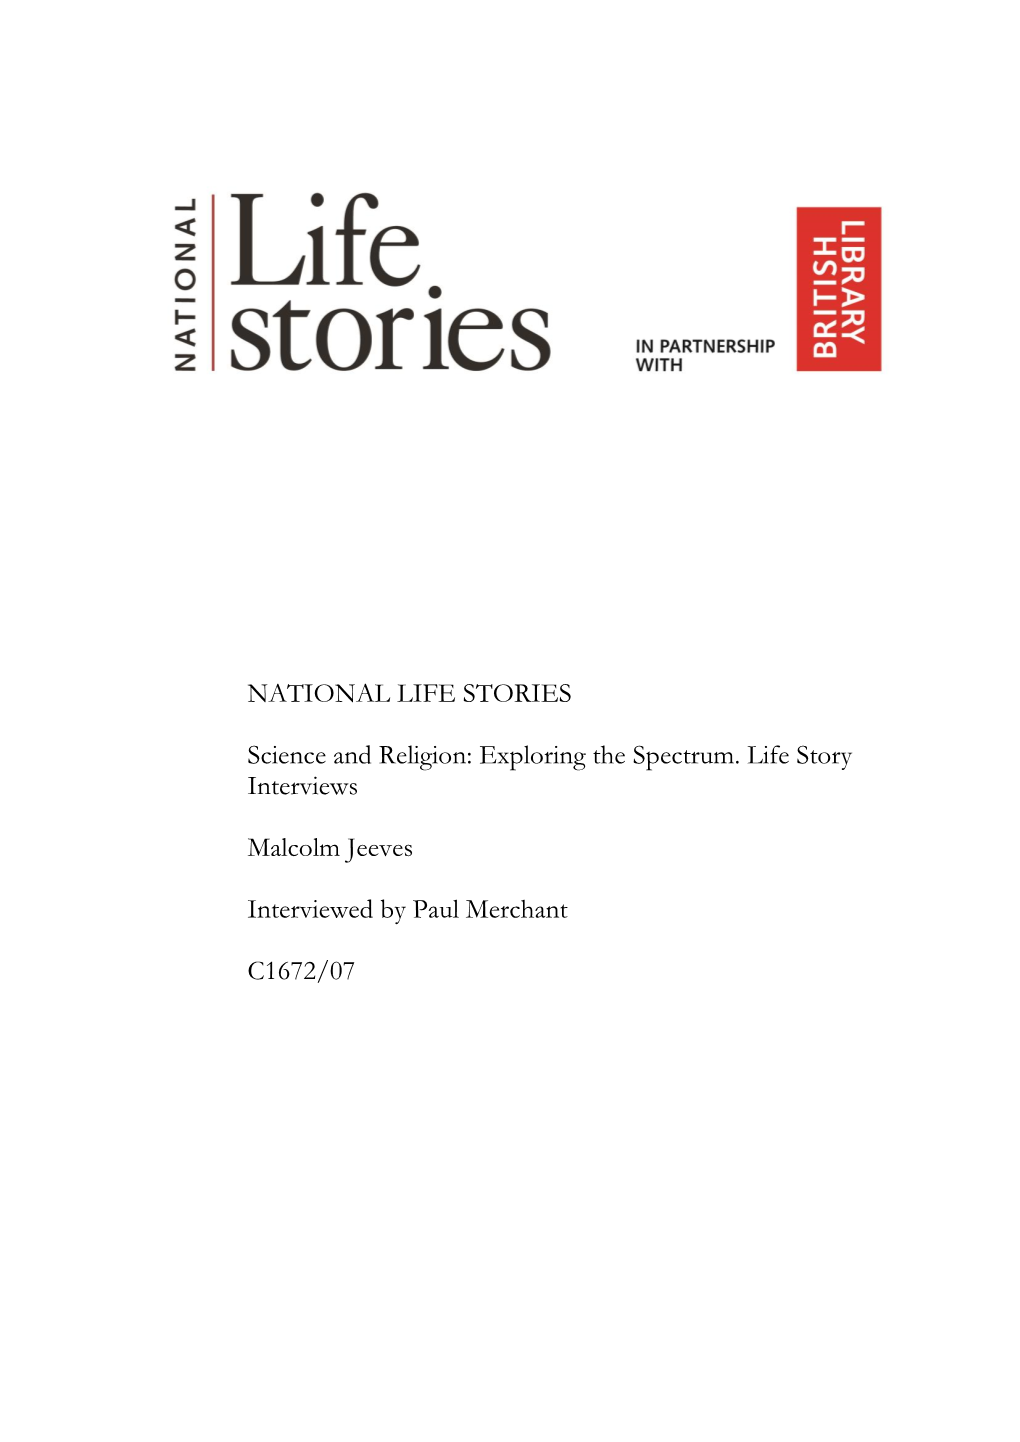 NATIONAL LIFE STORIES Science and Religion